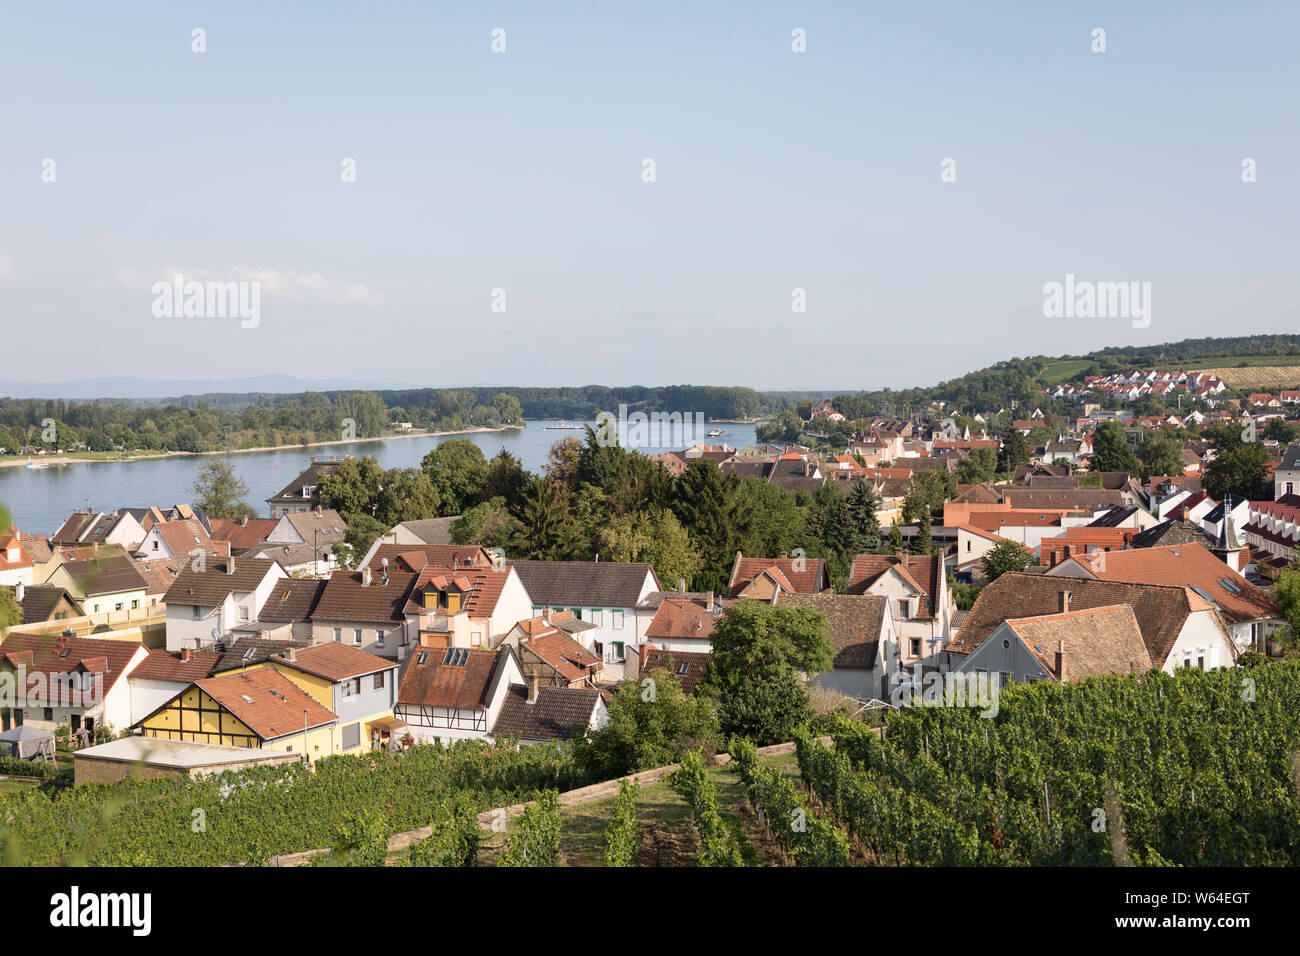 View on the town of Nierstein, Germany with a vineyard and grapes in front and the river Rhine in the background Stock Photo